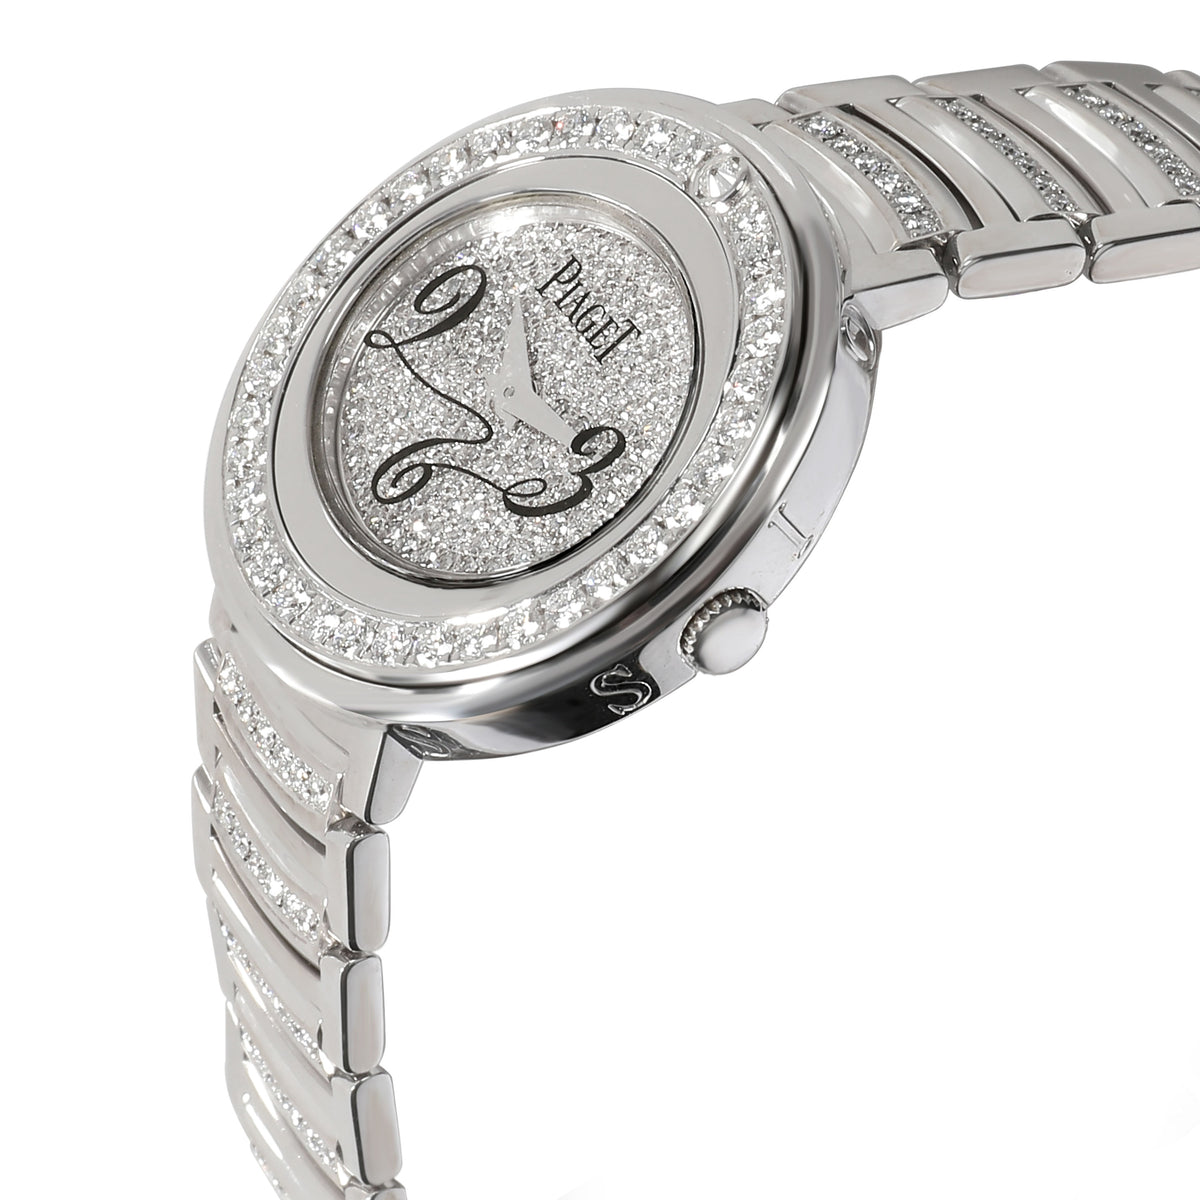 Piaget Possession GOA30086 Women's Watch in 18kt White Gold